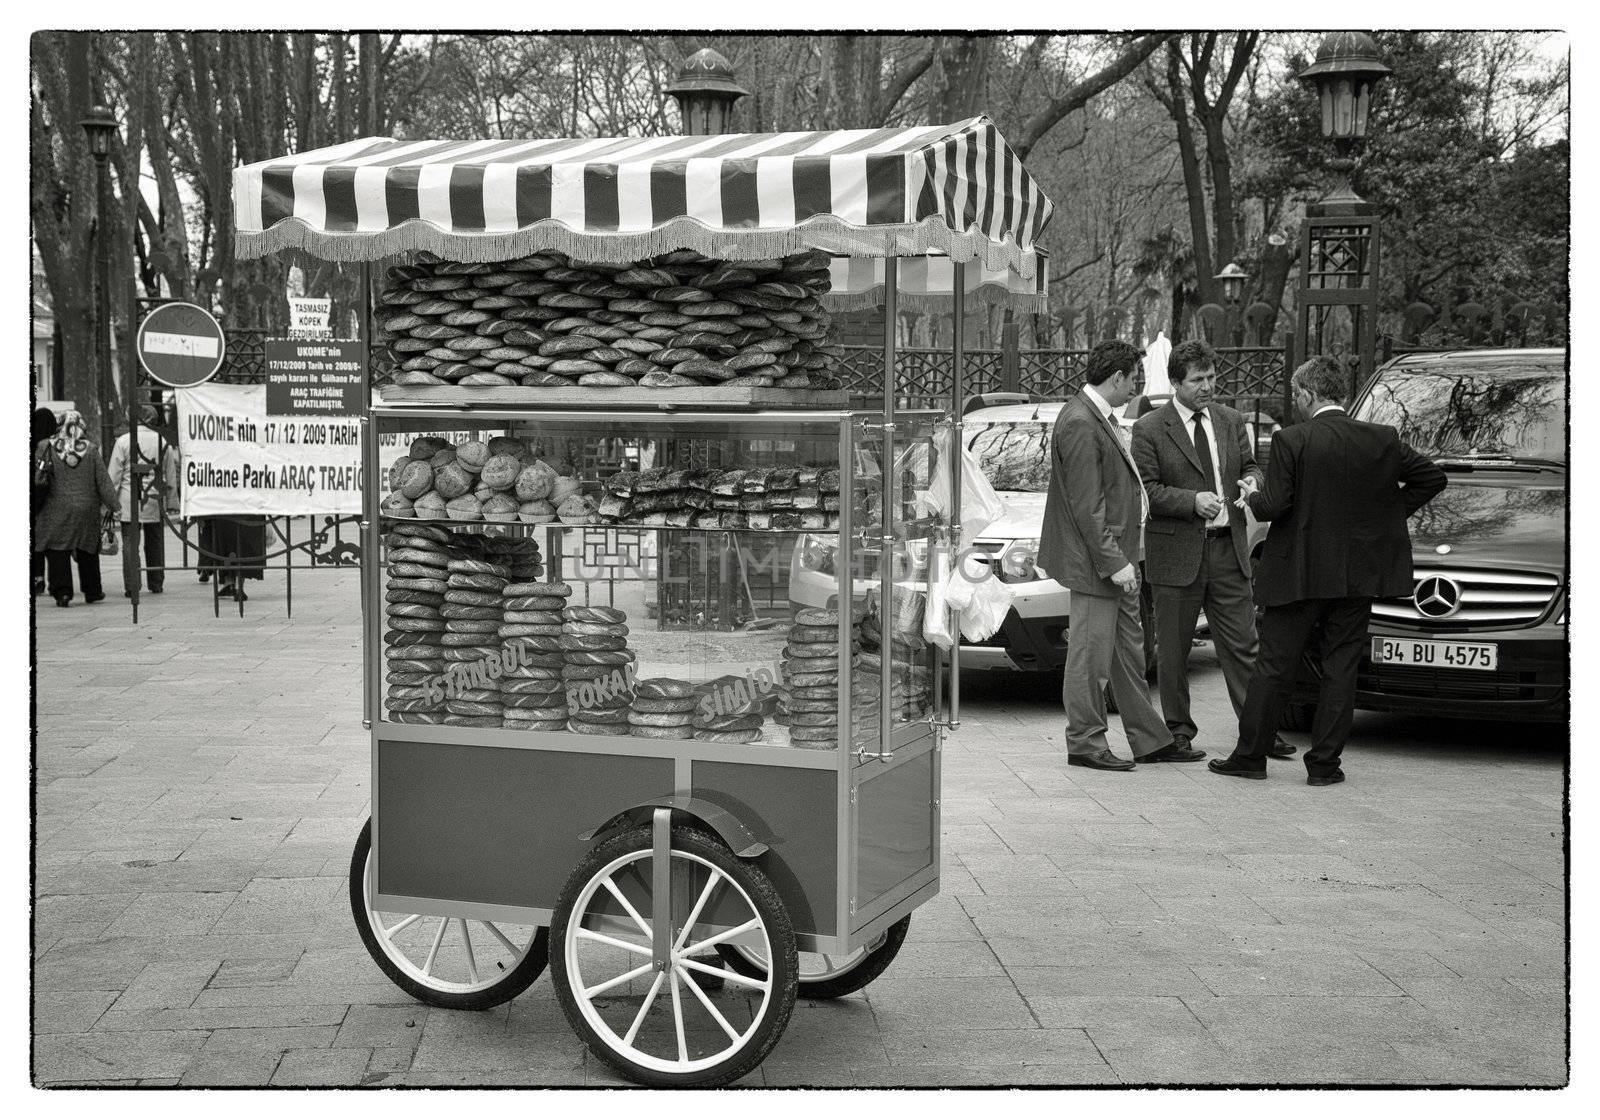 Simit cart Gulhane Park by ABCDK